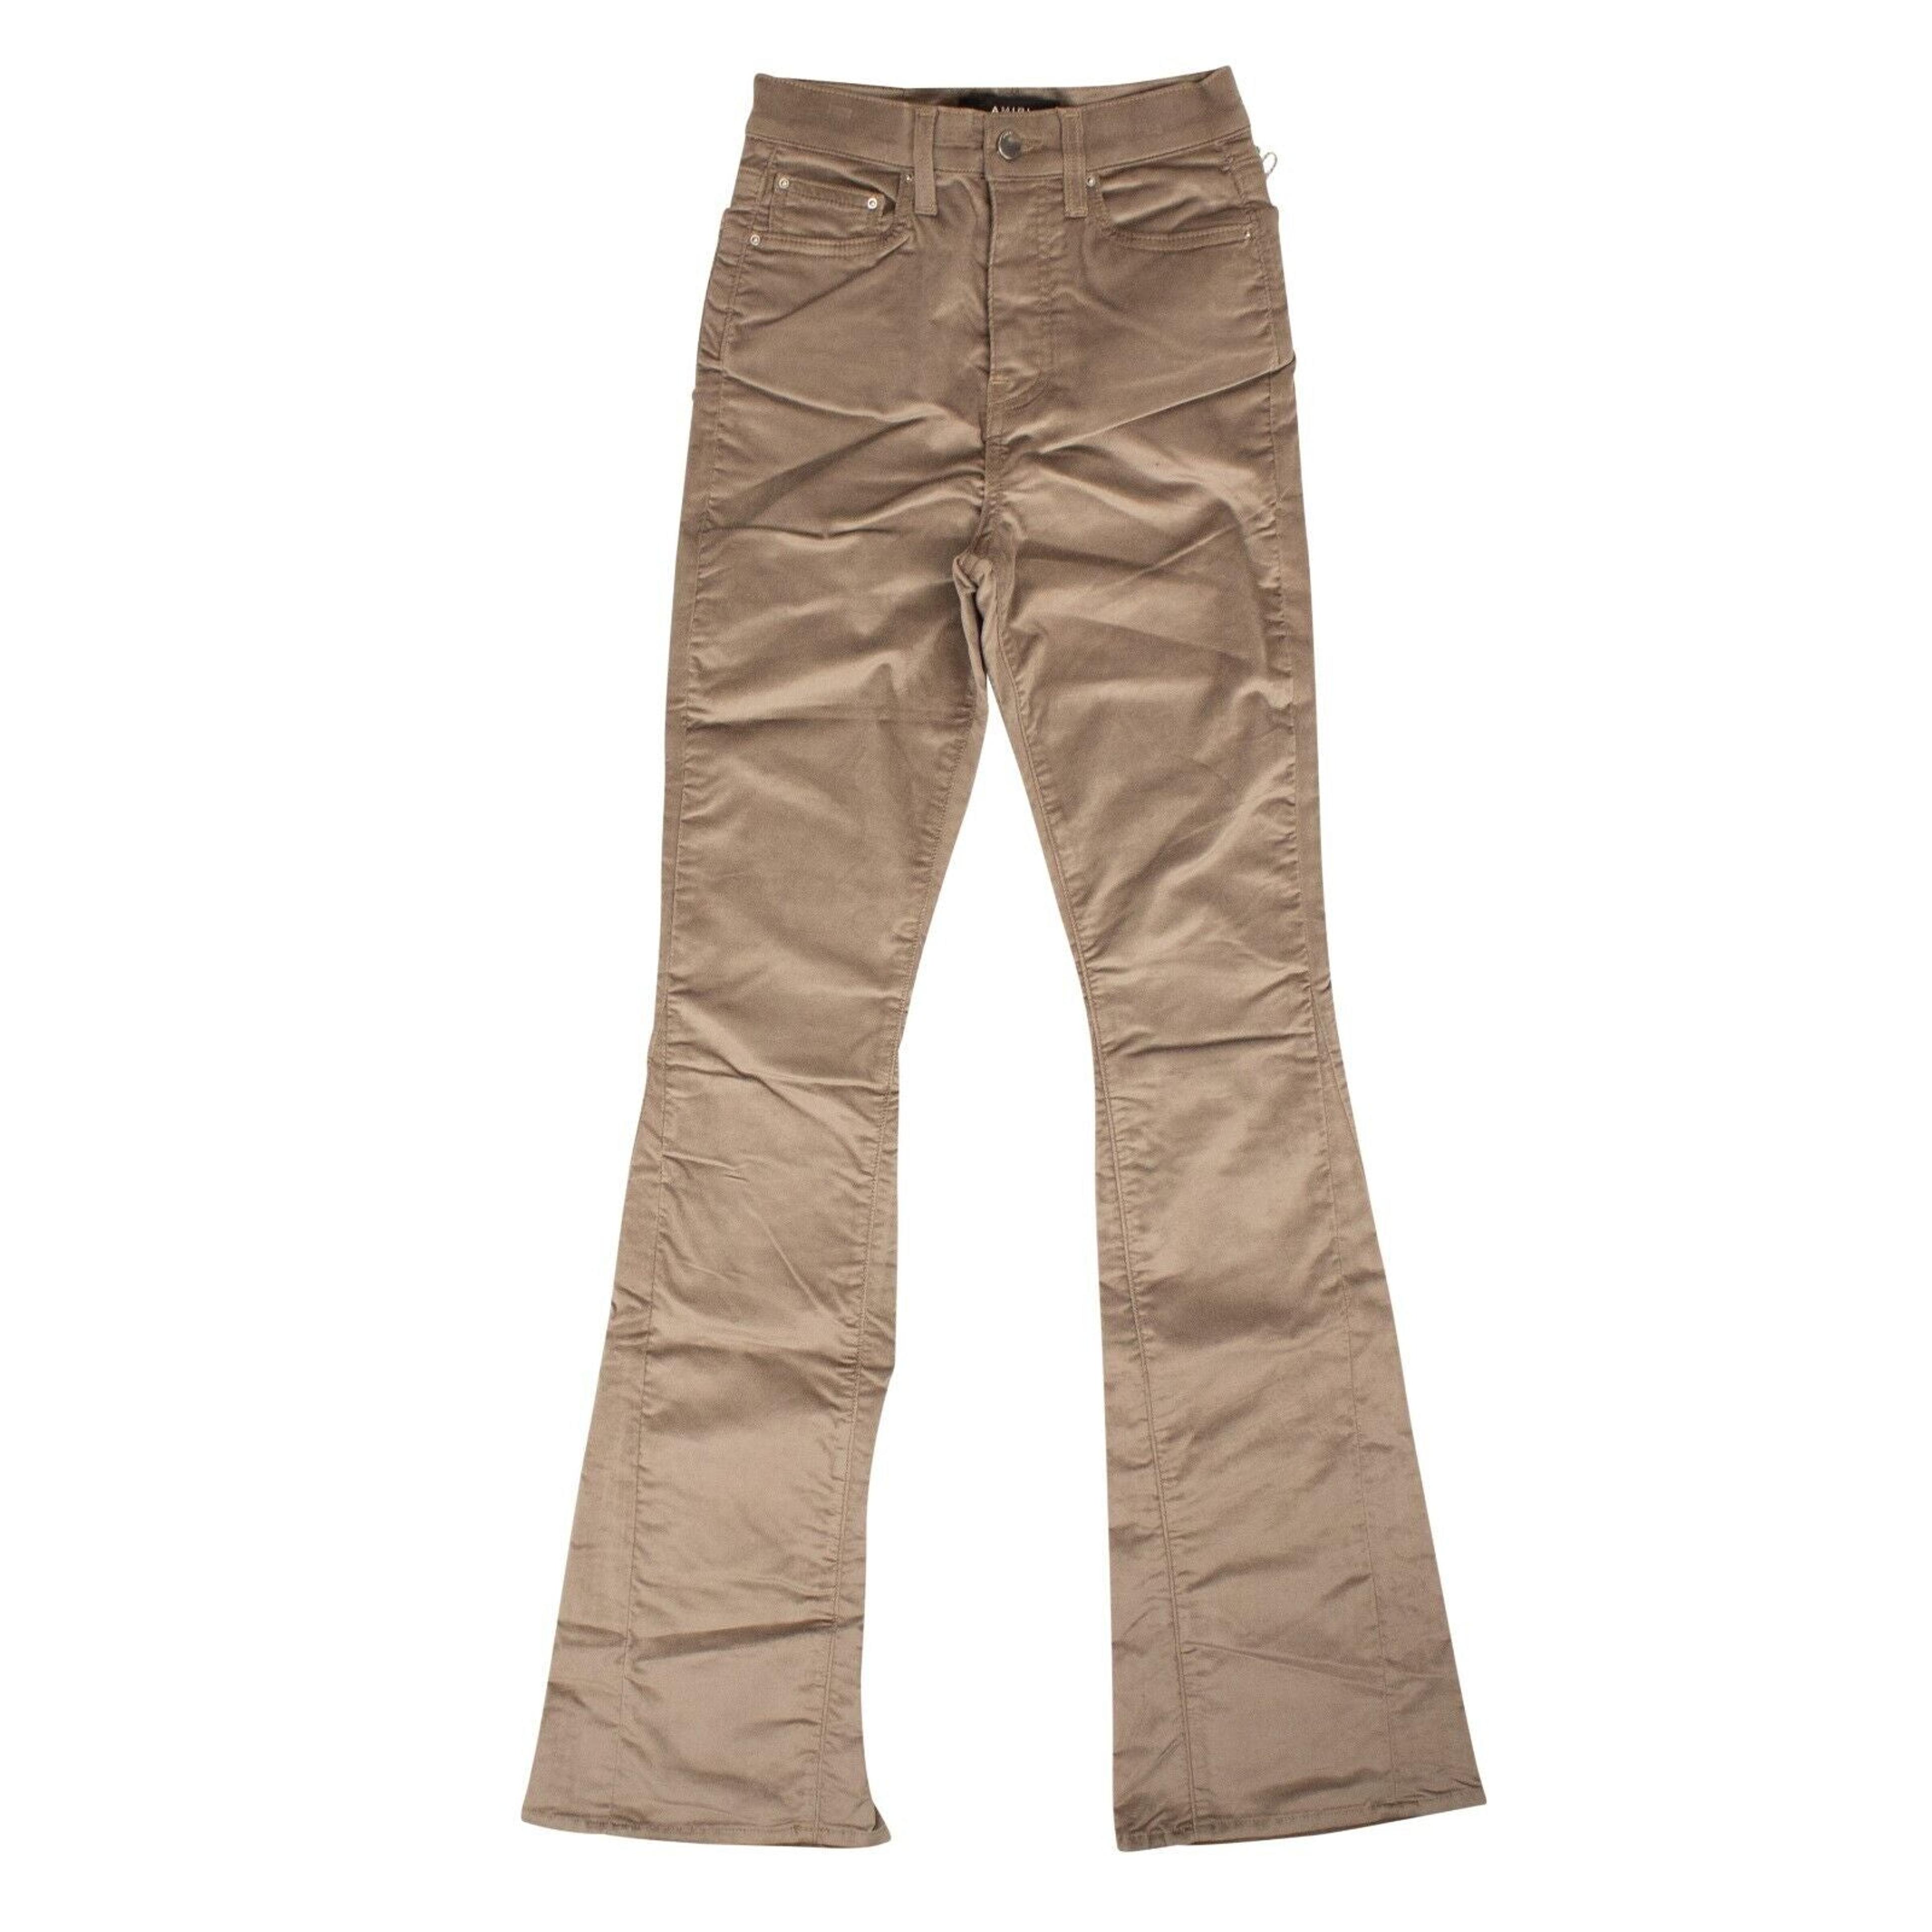 Alternate View 1 of Sand Velour Flare Stack Pants